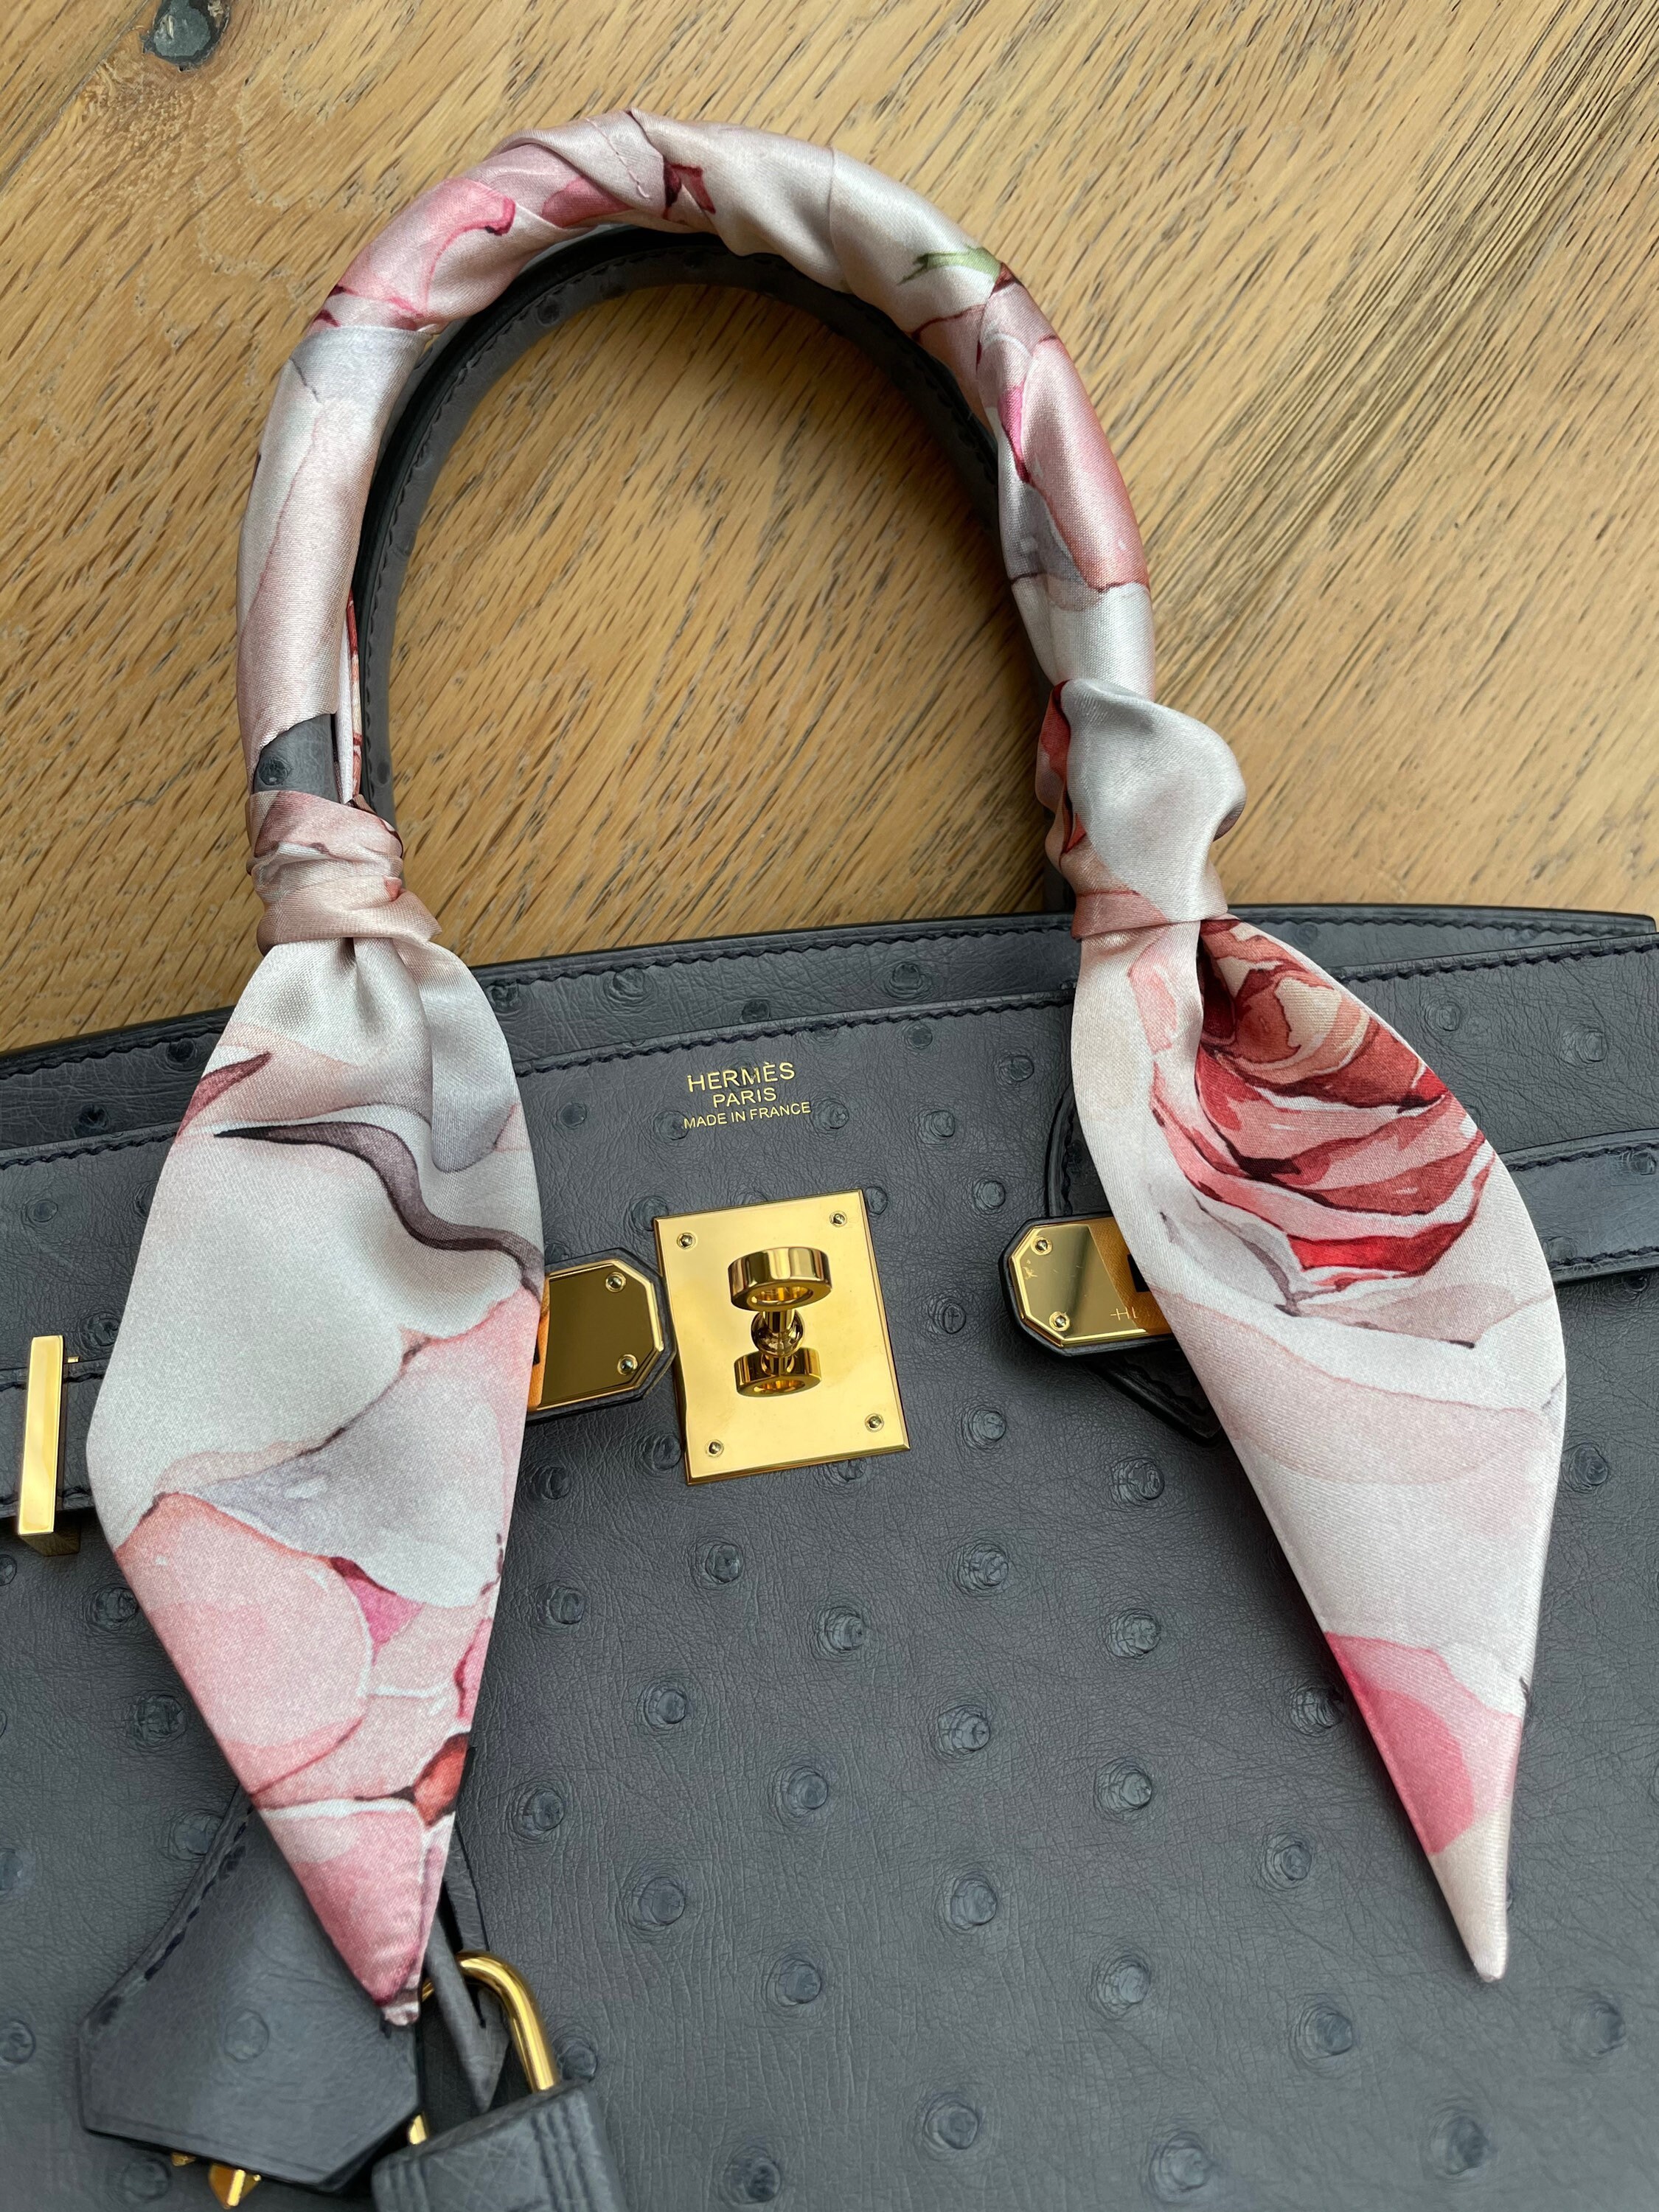 Bandeau's add the cutest touch to any LV bag! Let me know if you